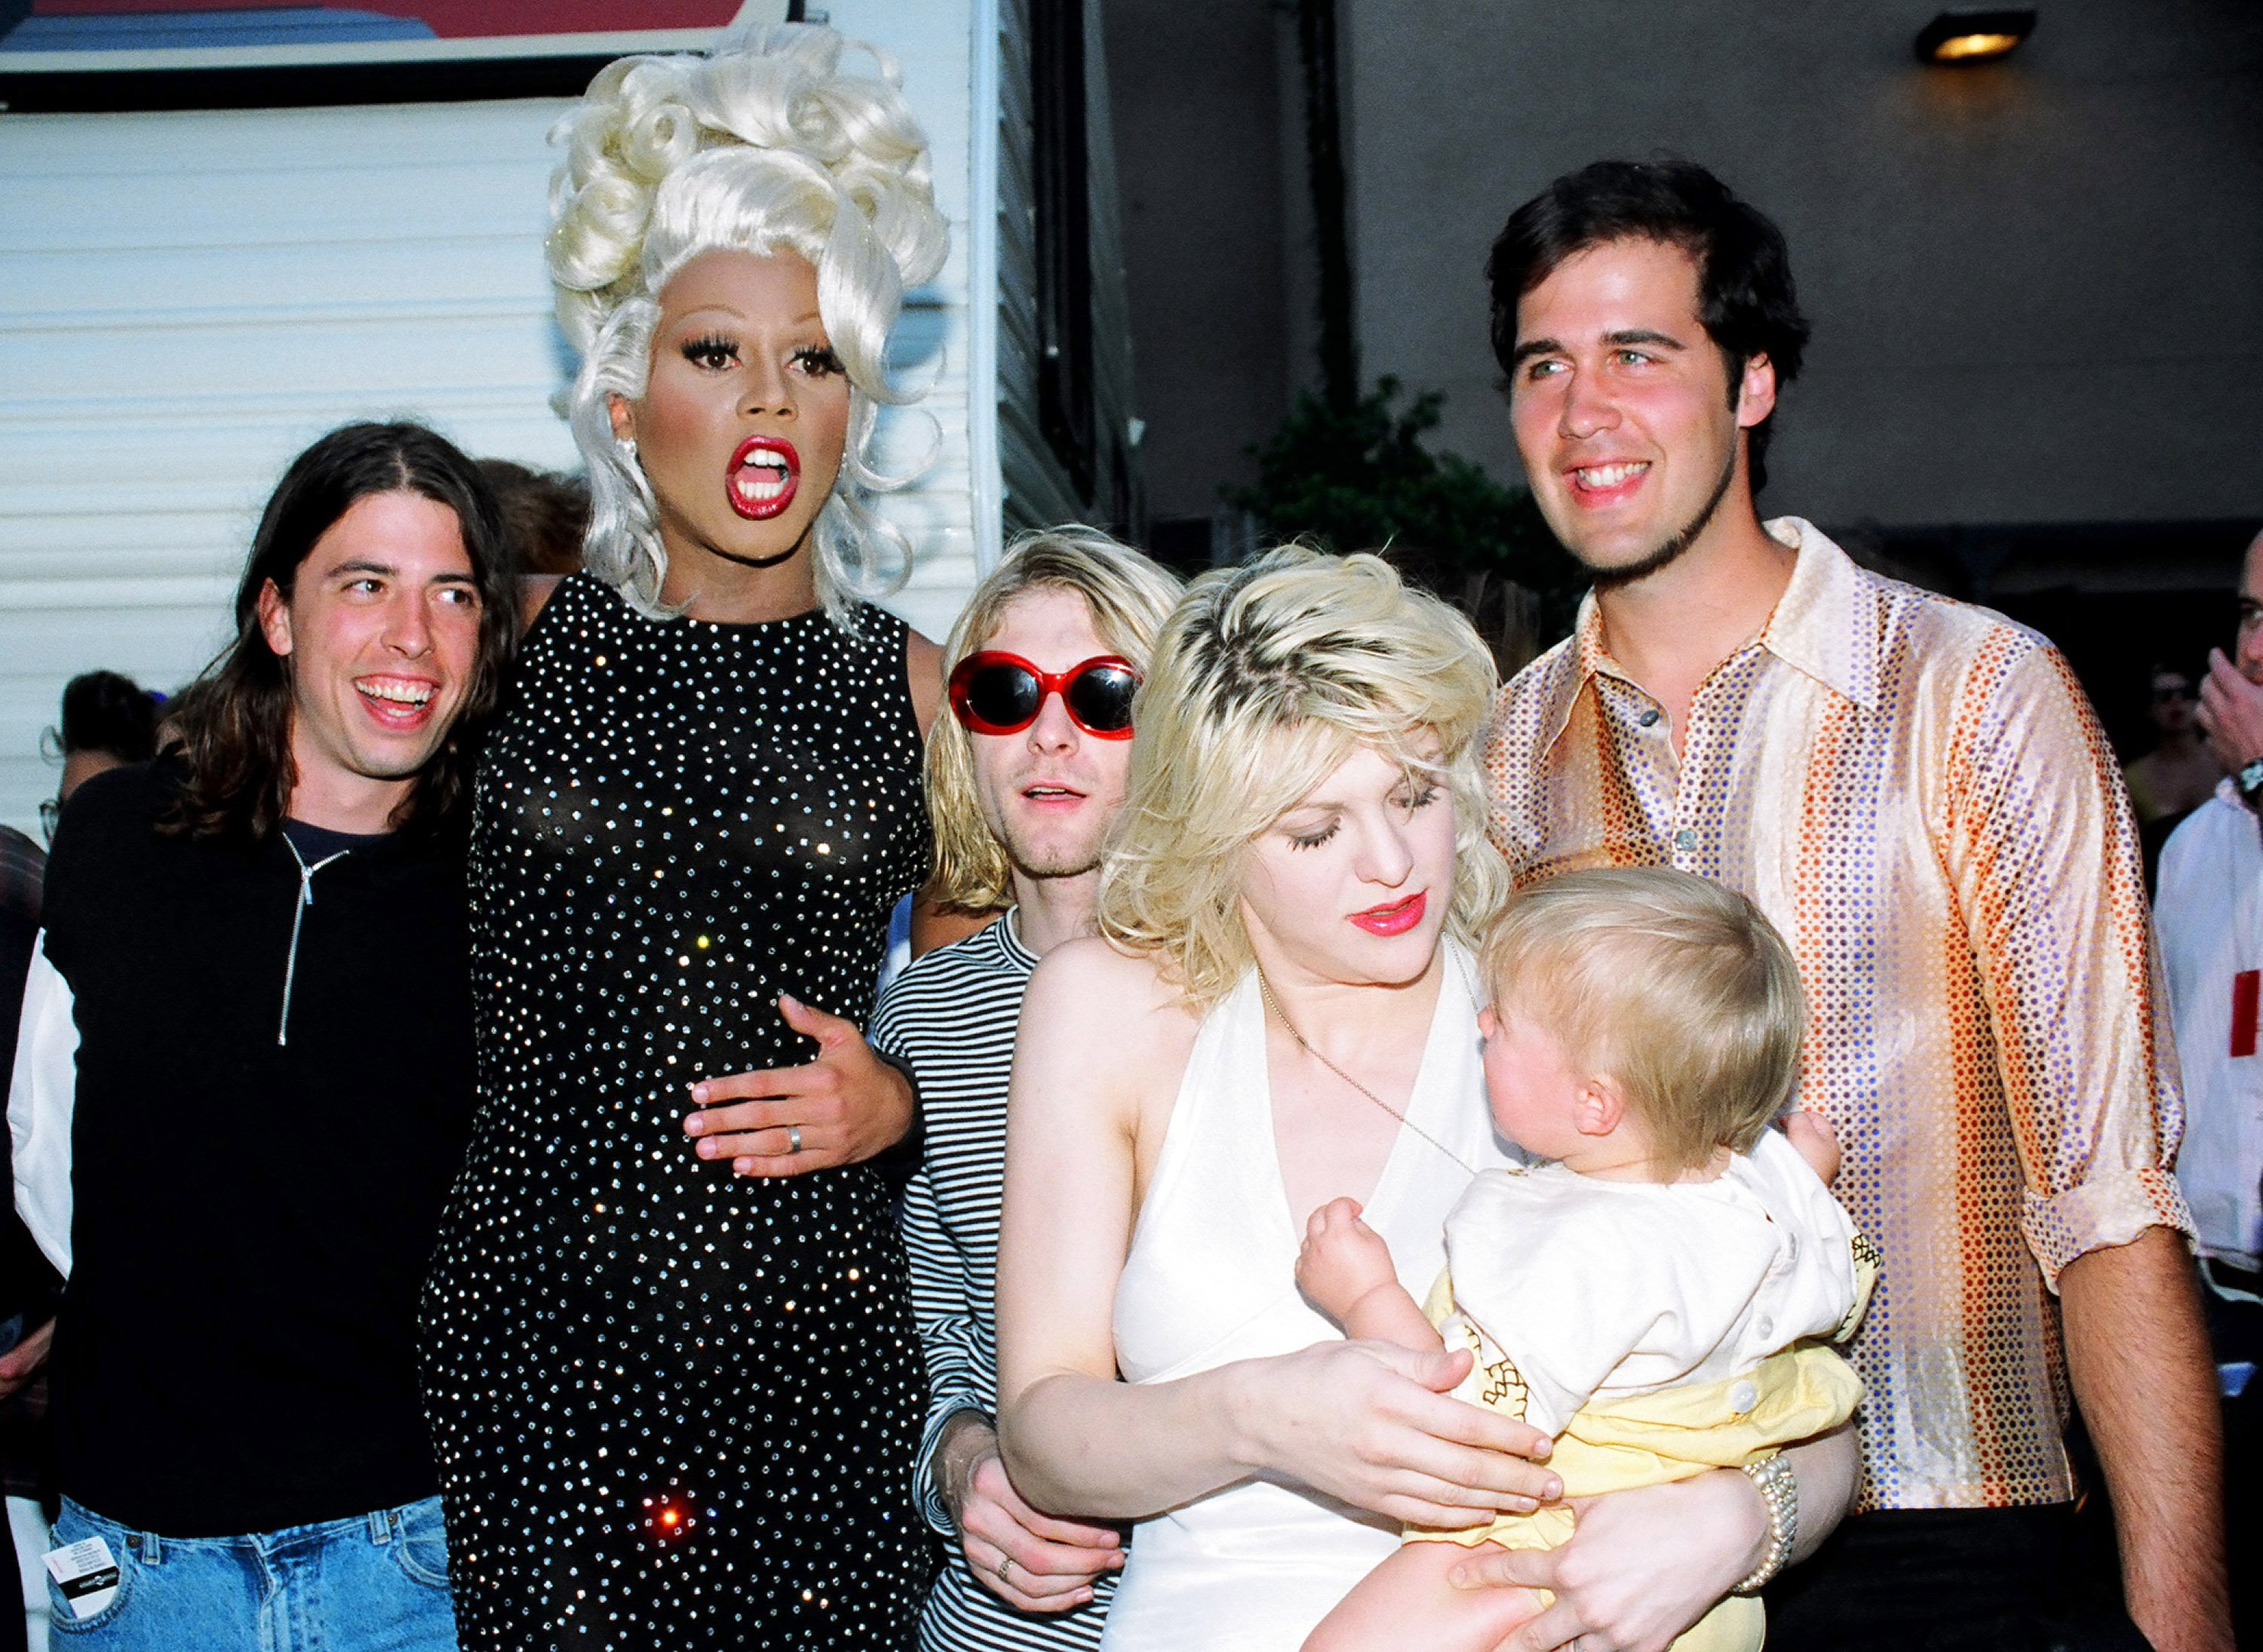 RuPaul with Dave Grohl, Kurt Cobain and Krist Novoselic of Nirvana, and Courtney Love with daughter Frances Bean Cobain standing in a row